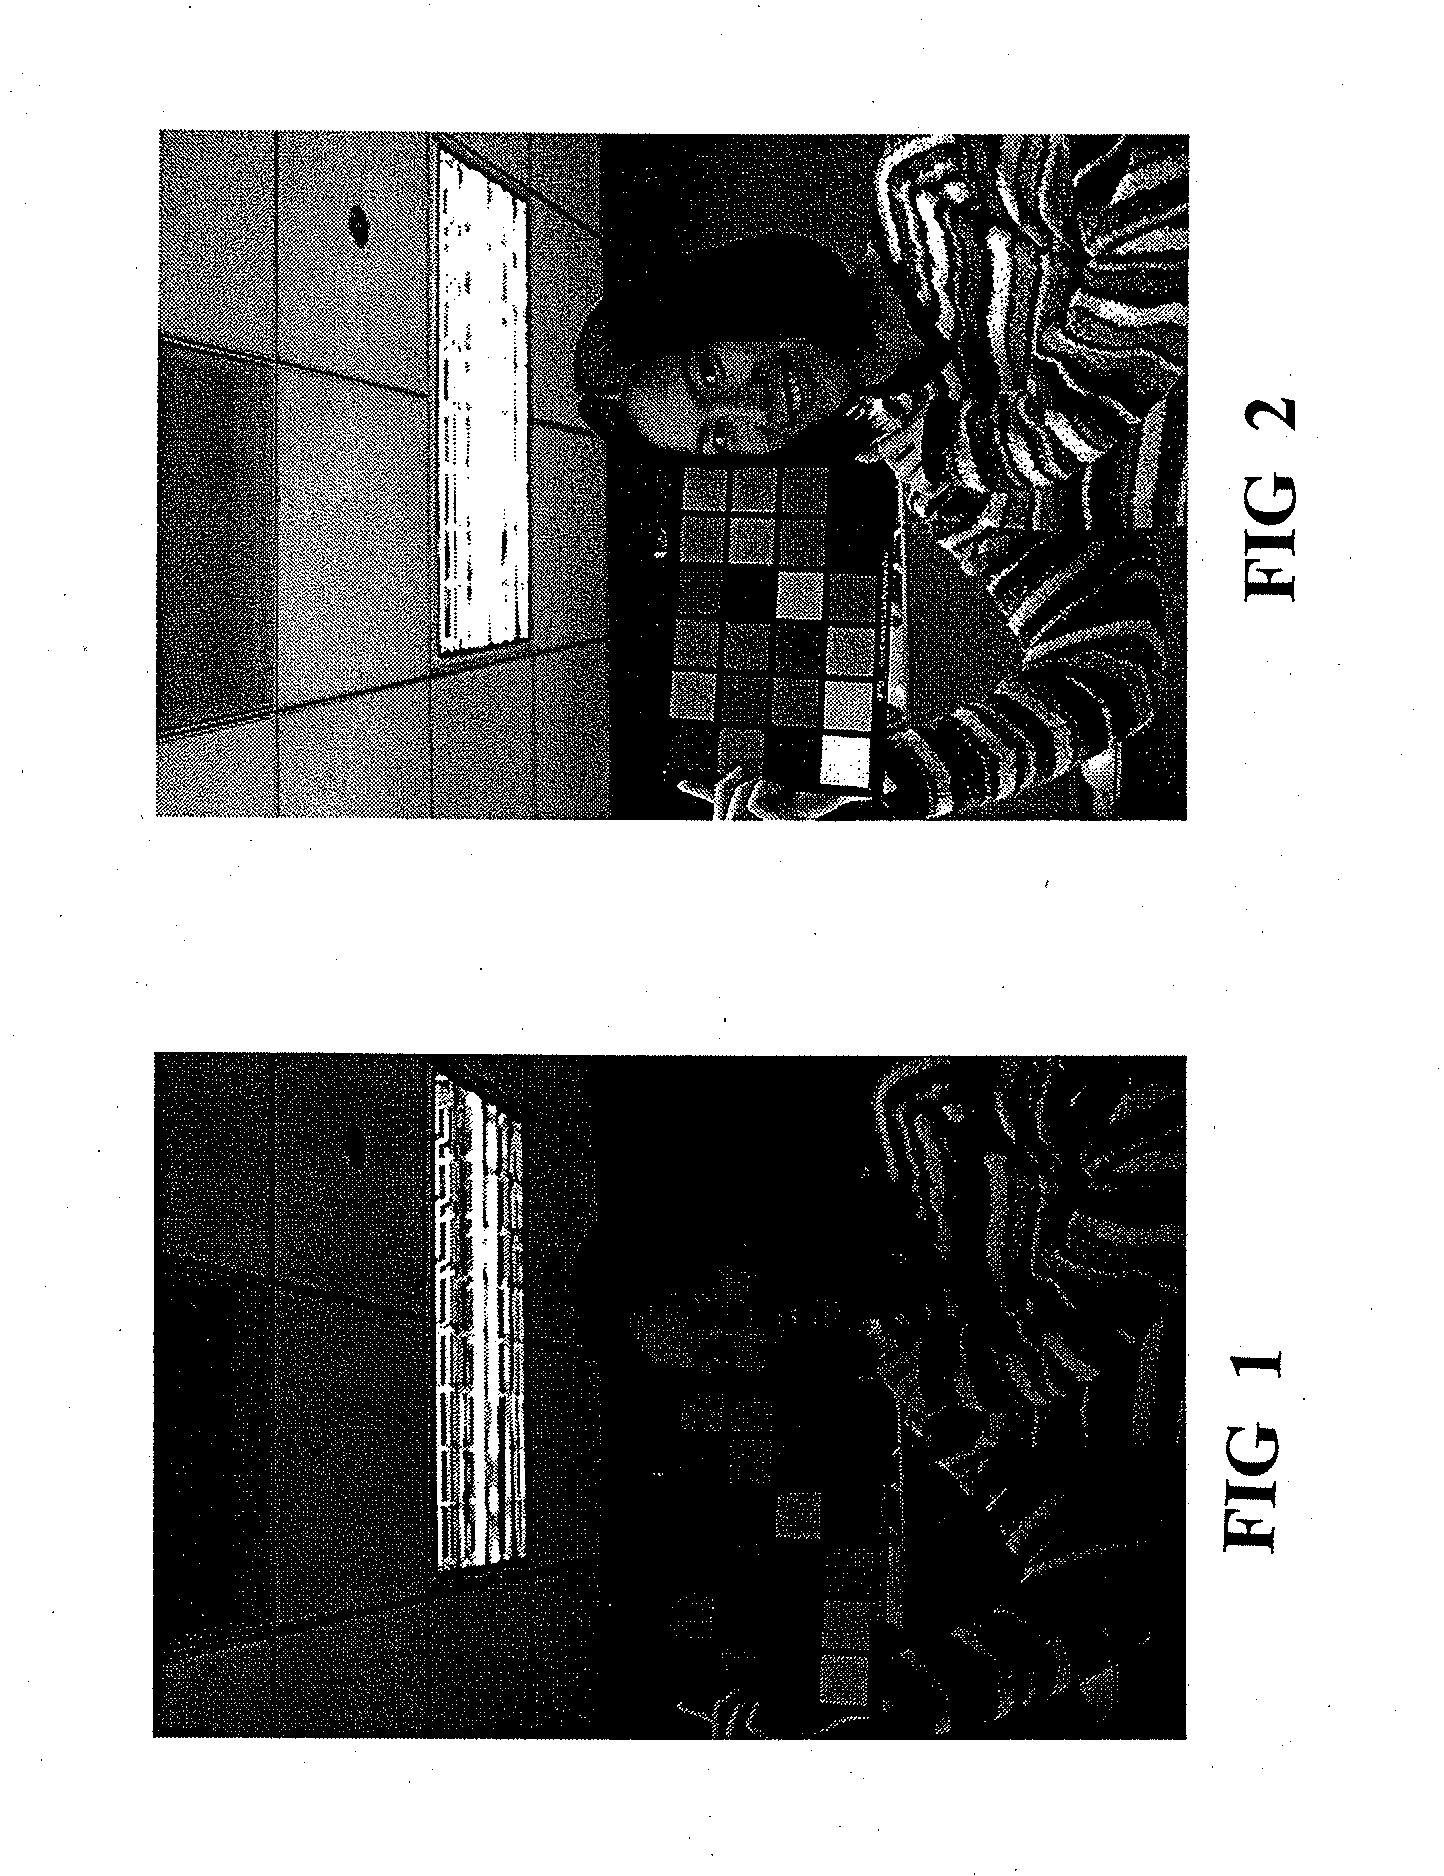 Method, apparatus and system for dynamic range estimation of imaged scenes